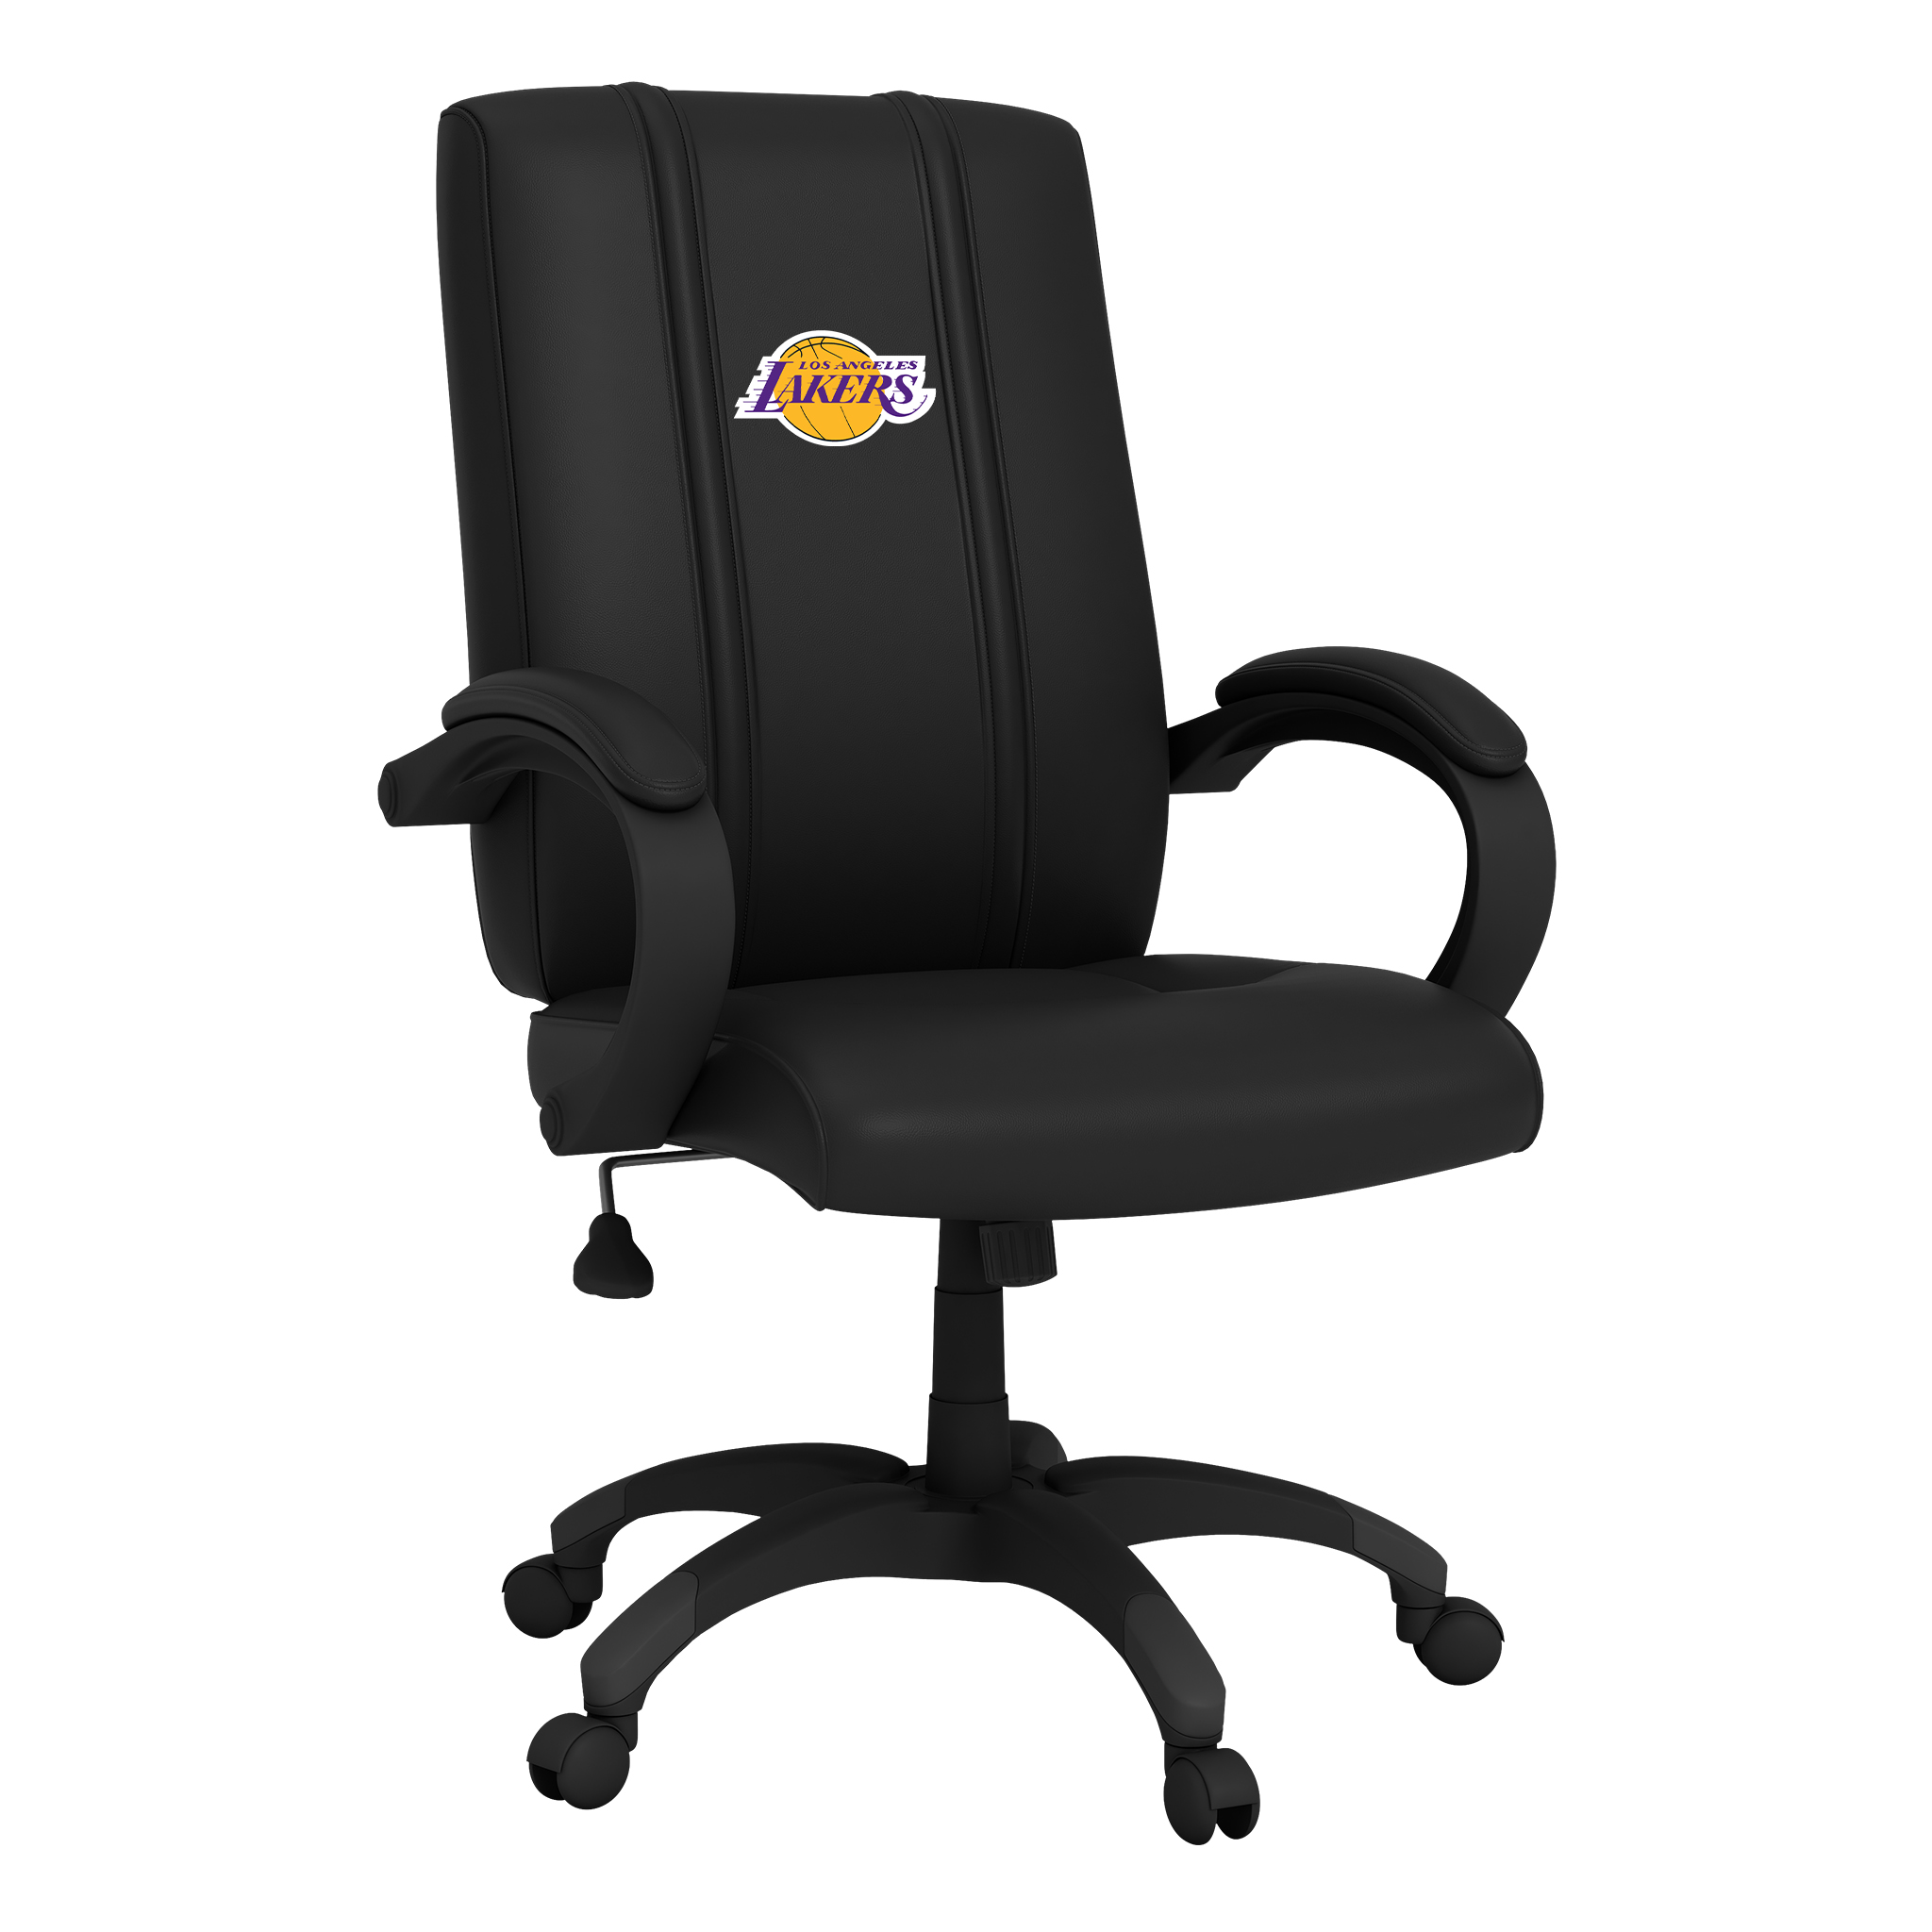 Los Angeles Lakers Office Chair 1000 with Los Angeles Lakers Logo